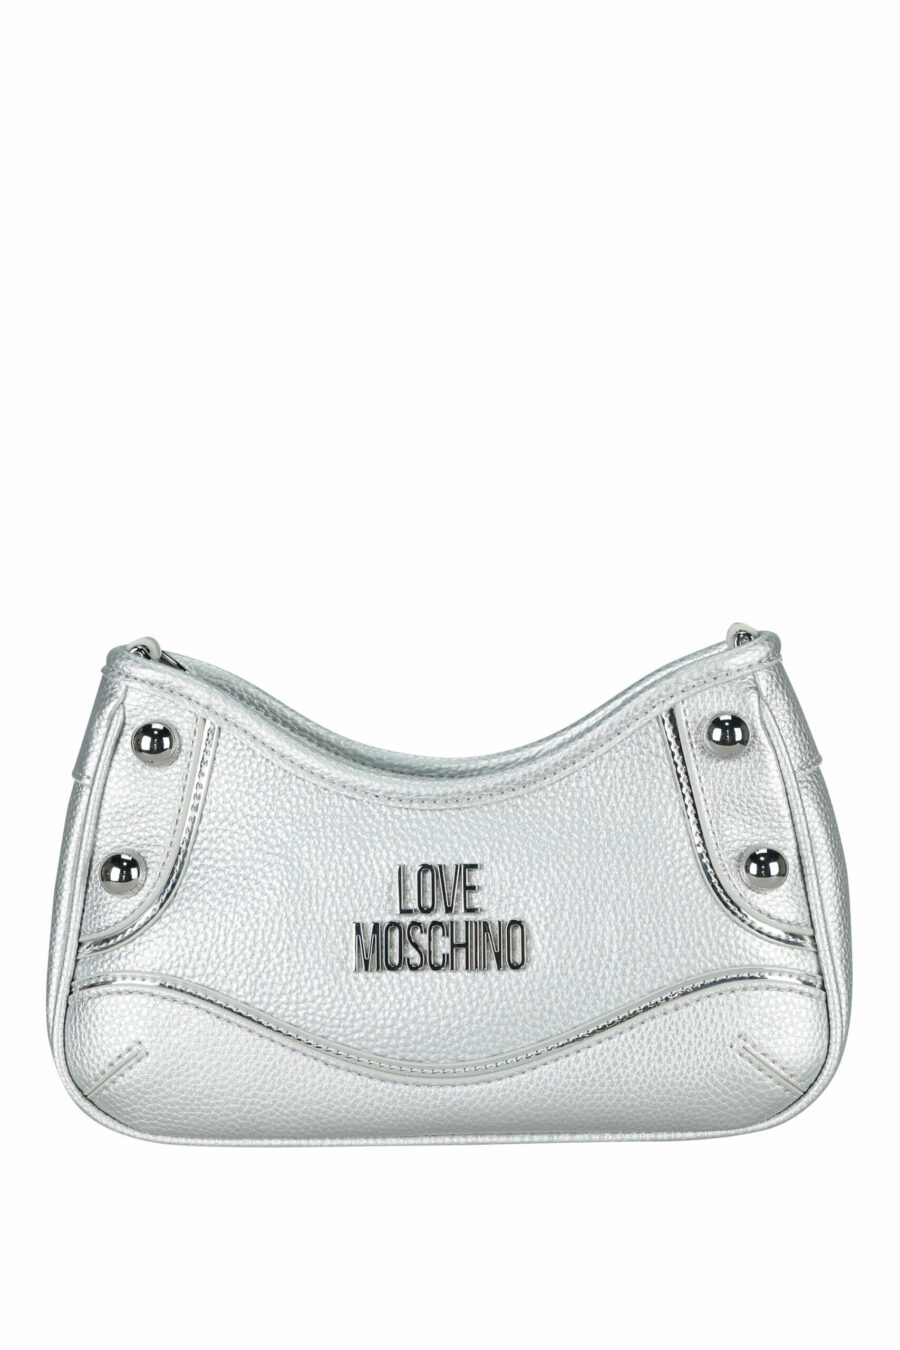 Silver leather shoulder bag with logo and gold details - 8050537397687 scaled